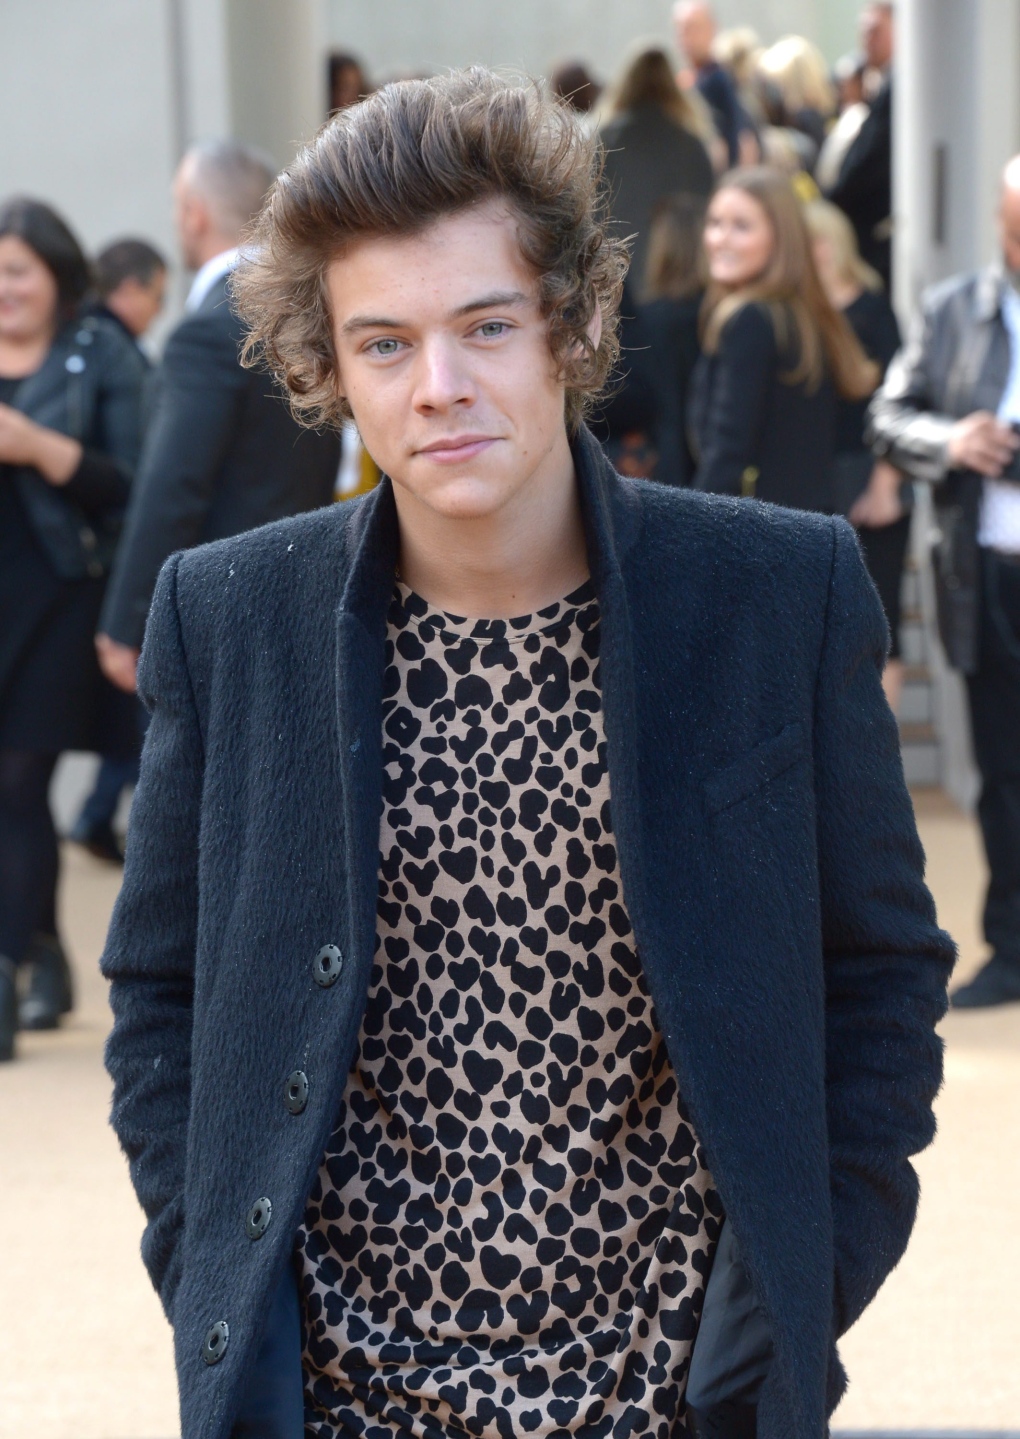 Harry Styles wins 'Best Look' gong at MTV Europe Music Awards | CTV News